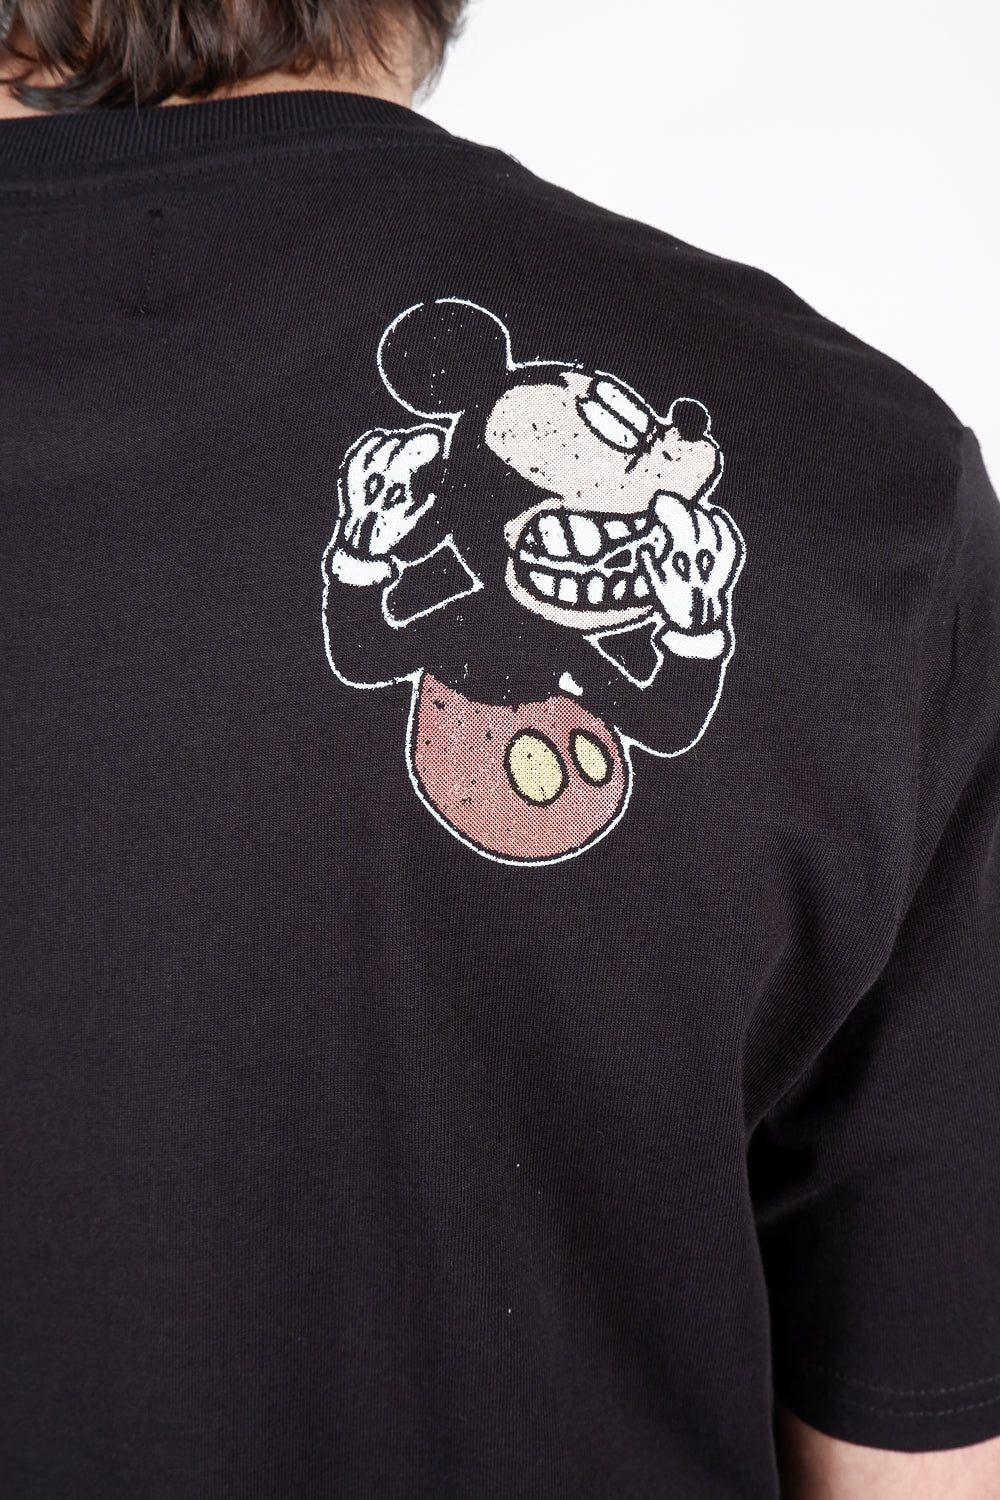 Buy the ABE Disney Disorder T-Shirt Black at Intro. Spend £50 for free UK delivery. Official stockists. We ship worldwide.